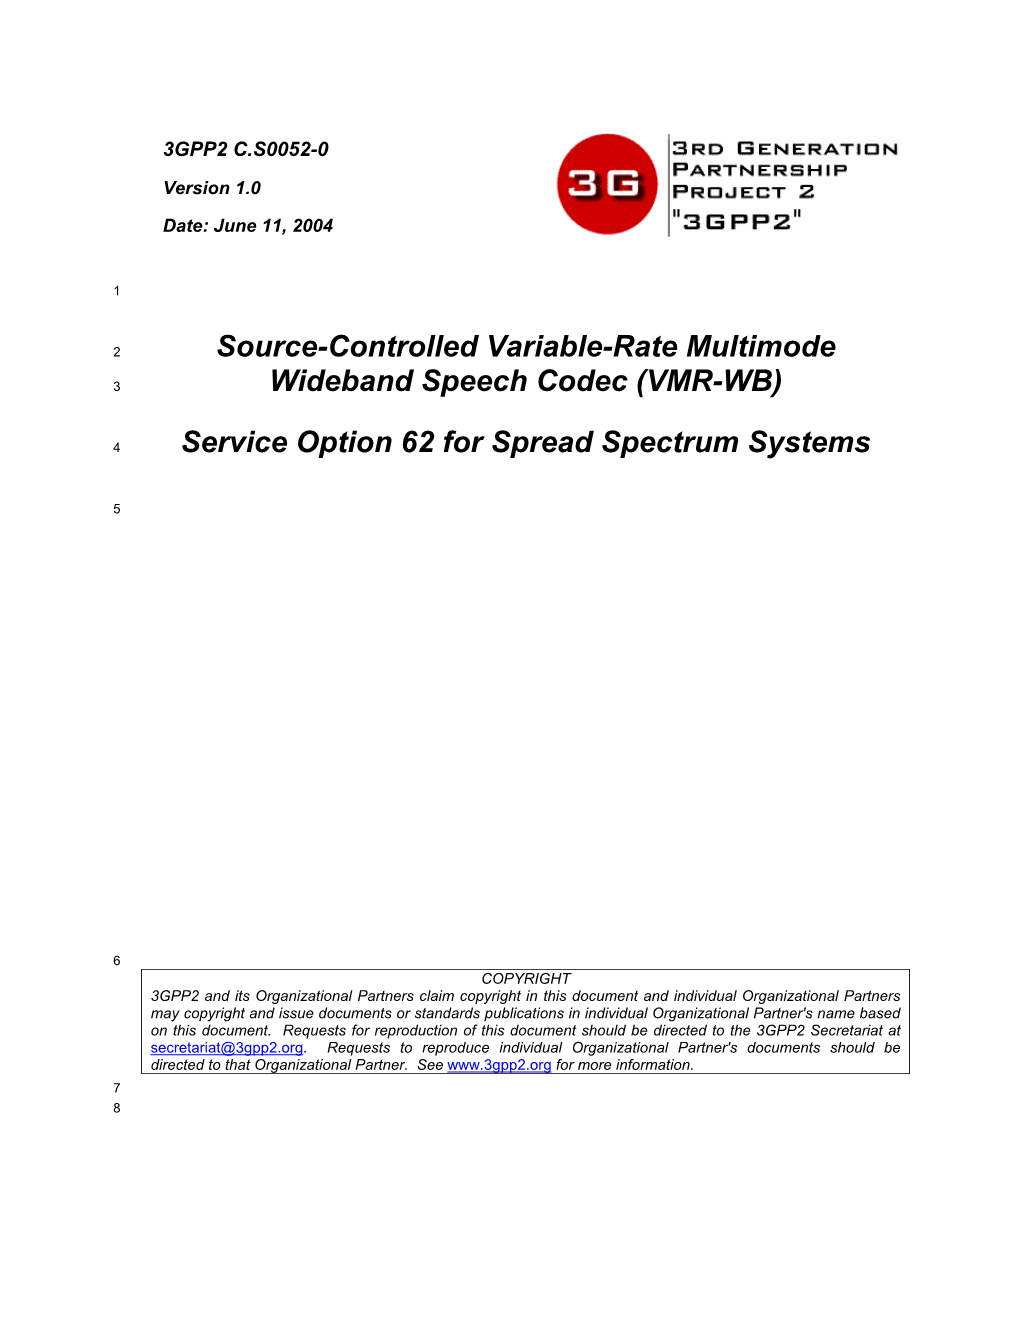 Source-Controlled Variable-Rate Multimode Wideband Speech Codec